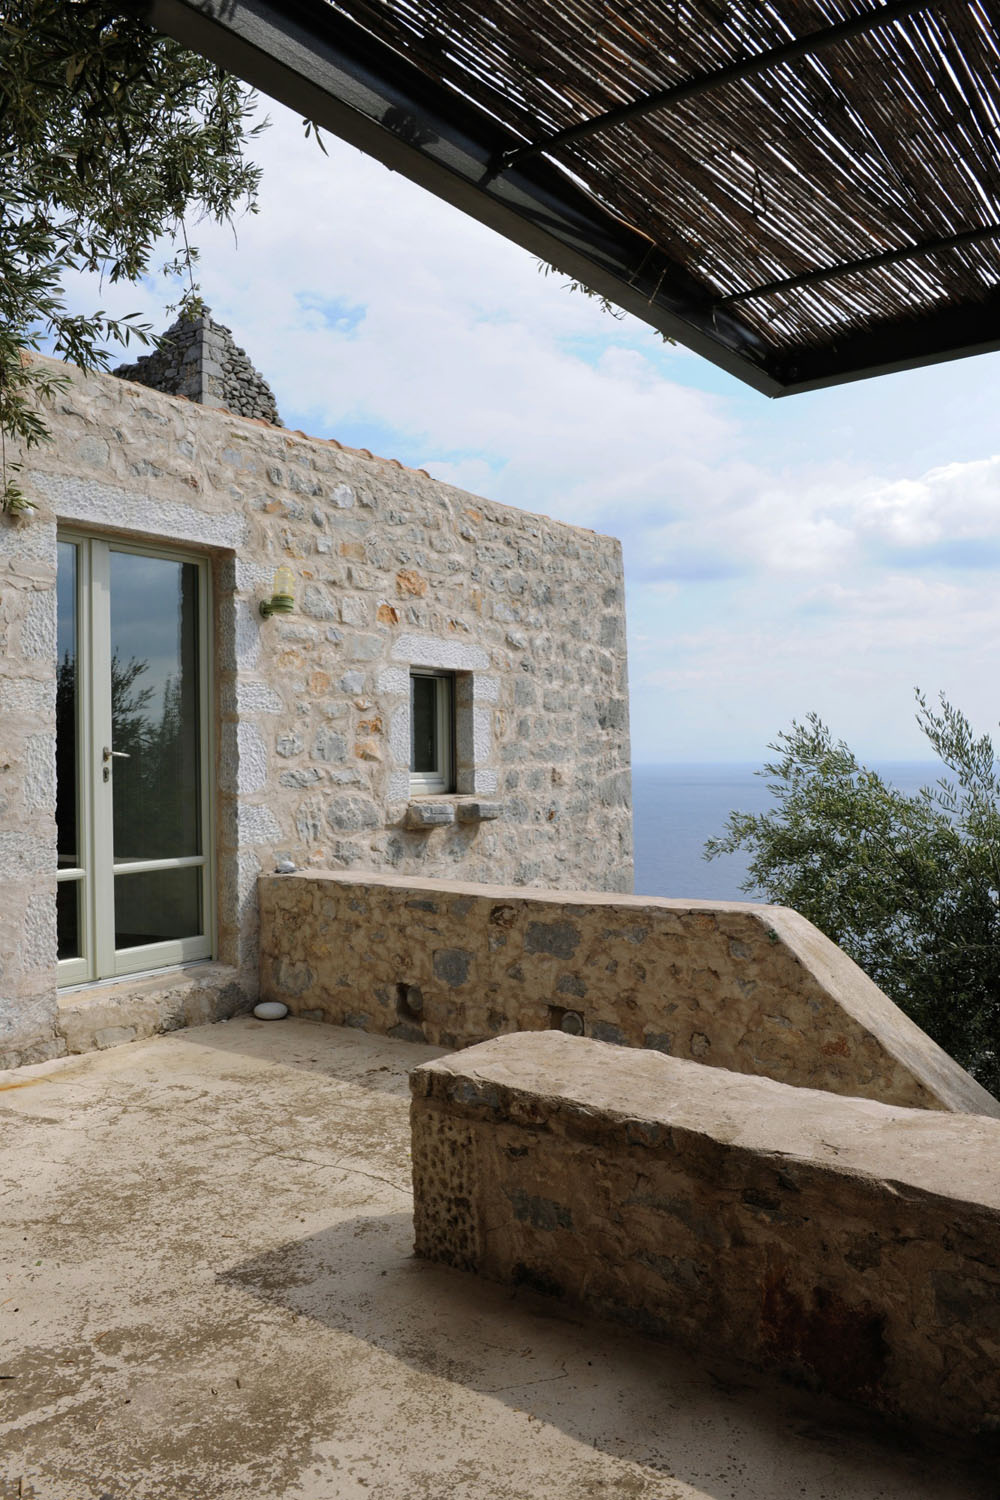 Historical Stone Building In Greece  Transformed Into 